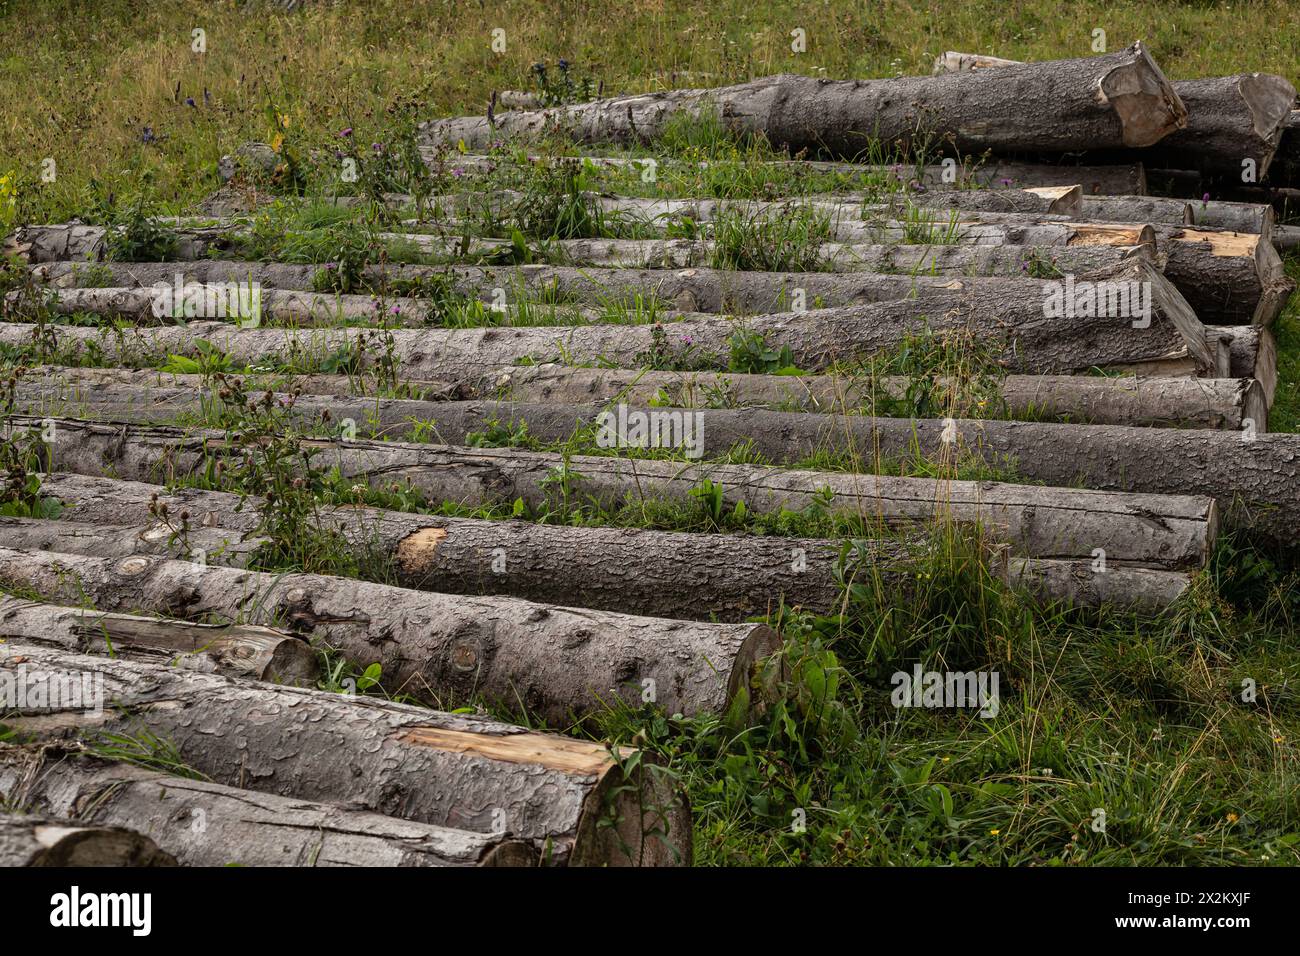 A pile of trunks lying on the grass near the forest edge. Stocking of firewood, deforestation. Logs closeup. Stock Photo